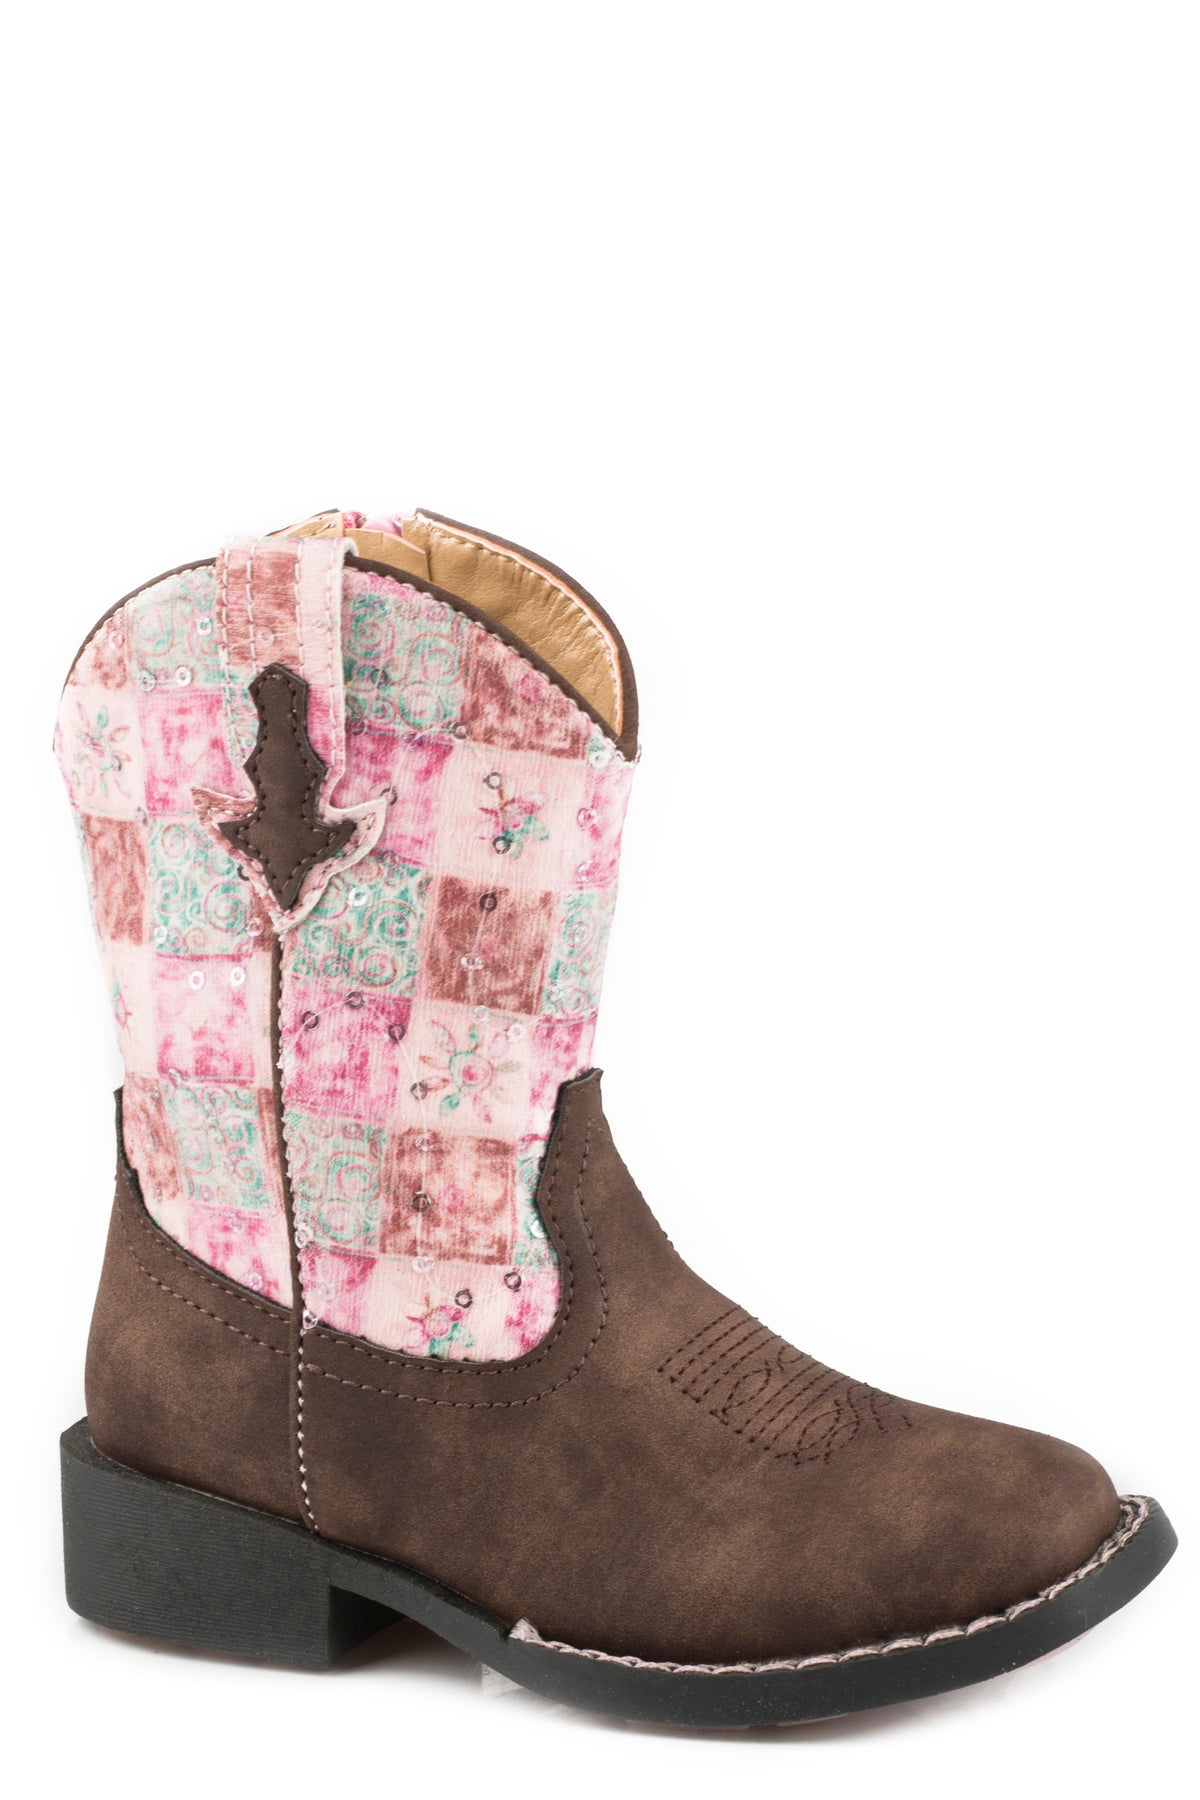 FLORAL SHINE BOOT